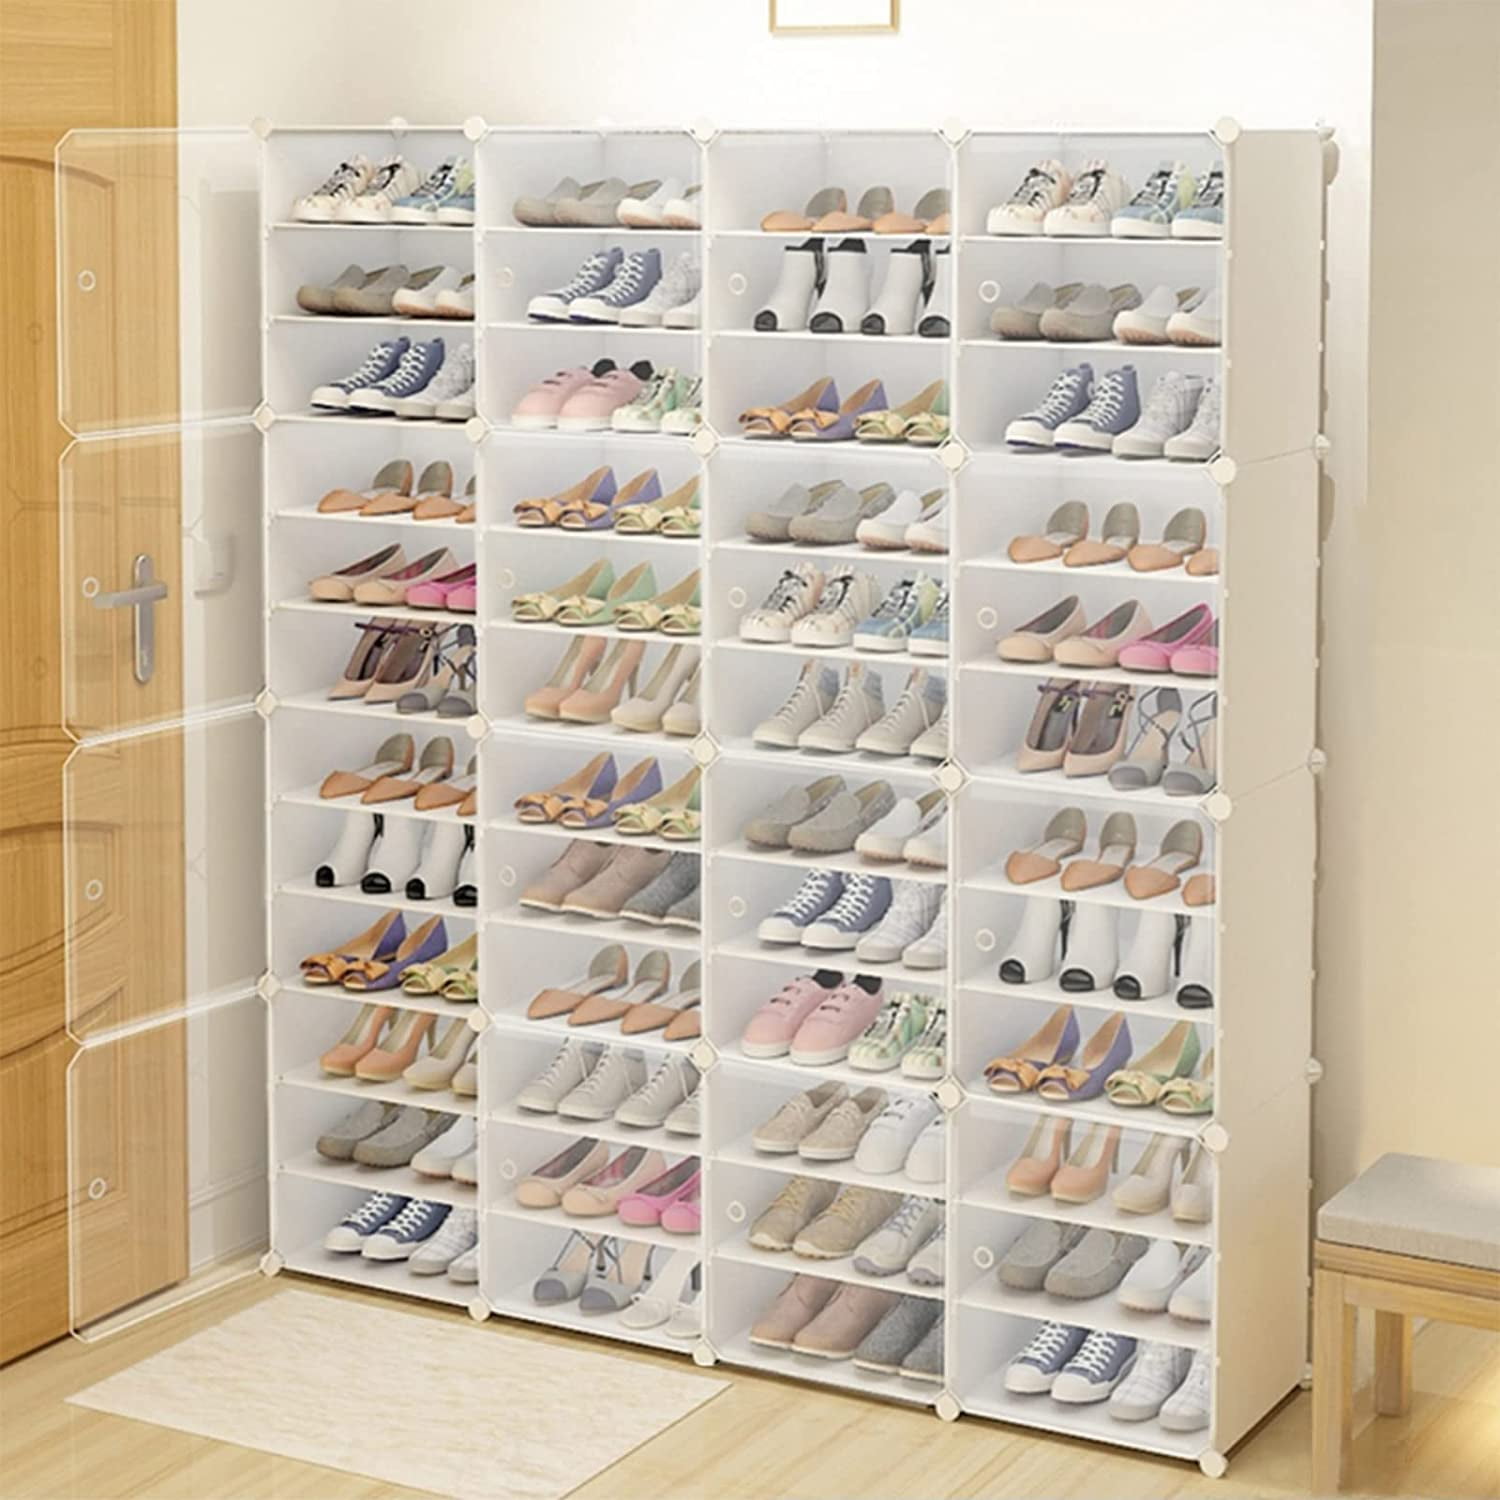  SUFAUY Shoe Rack for Bedroom Closet Stackable Fabric Shoe  Organizer, Extra Long Wide Shoe Storage Shelf, 11.8 x 42.5 x 15.7 Inches, 2  Tier, Bronze : Home & Kitchen